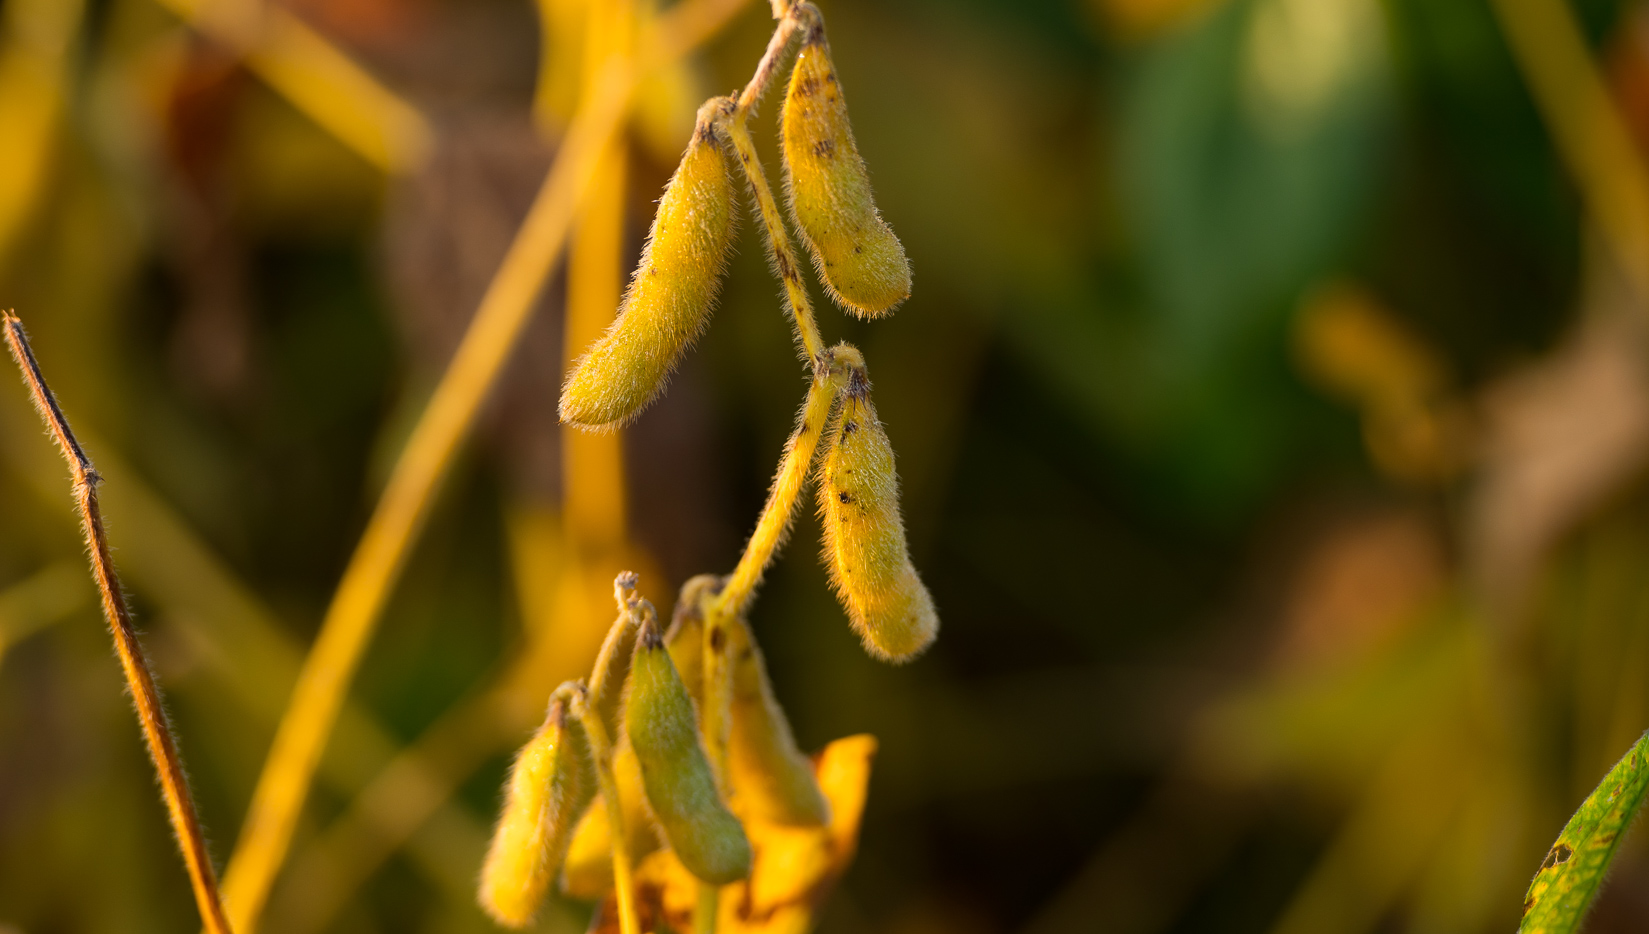 Soybeans glimmer in evening sun